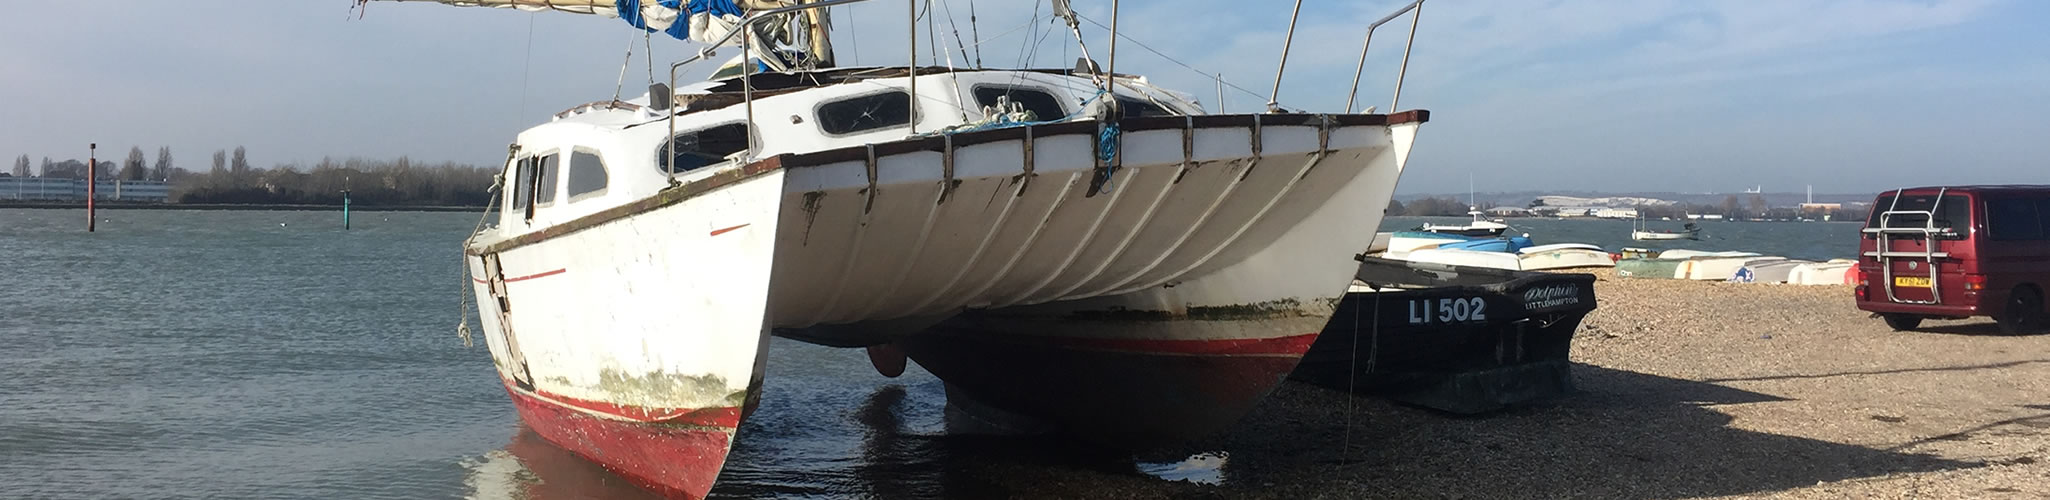 Motorboat Salvage - Got a Boat in Trouble? We Can Help!